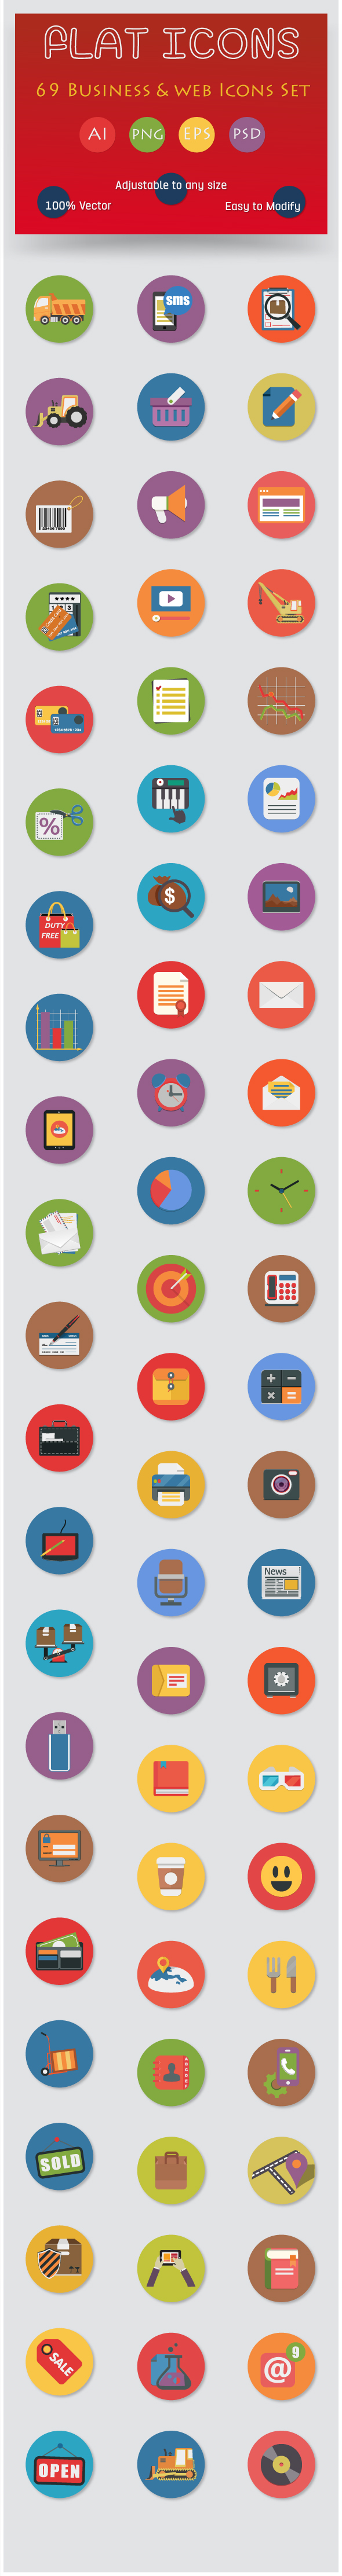 69 Flat Icons Set - Business and Web Services Icon